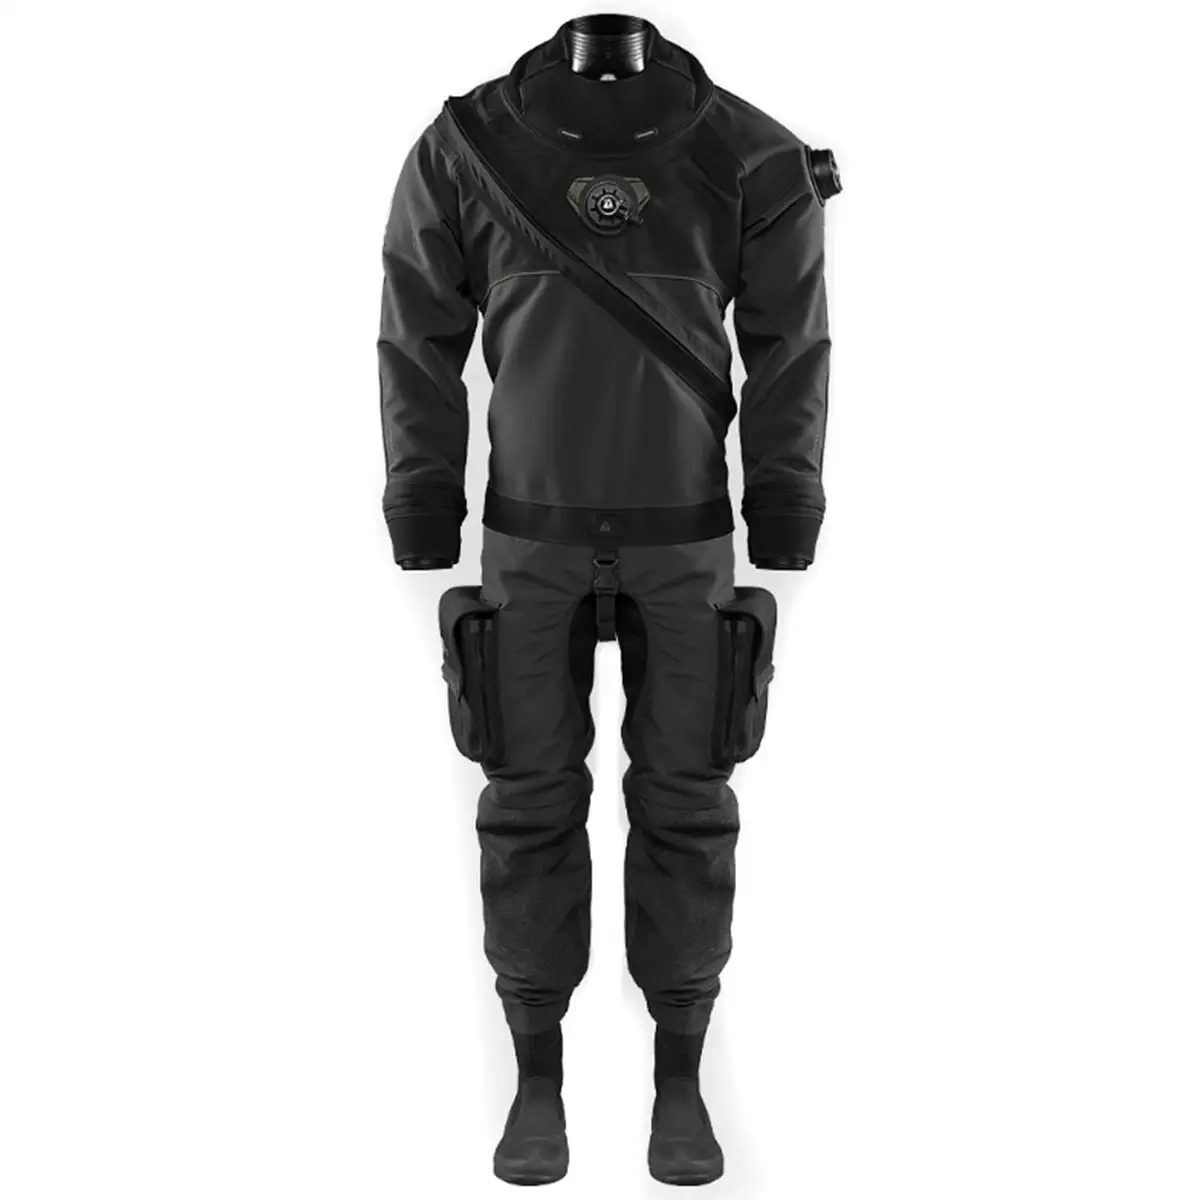 LKVER Neoprene Water Sports Dry Suit Breathable 5mm Wetsuit With Valves OEM Service Sea Deep Freediving Drysuit Manufacturer